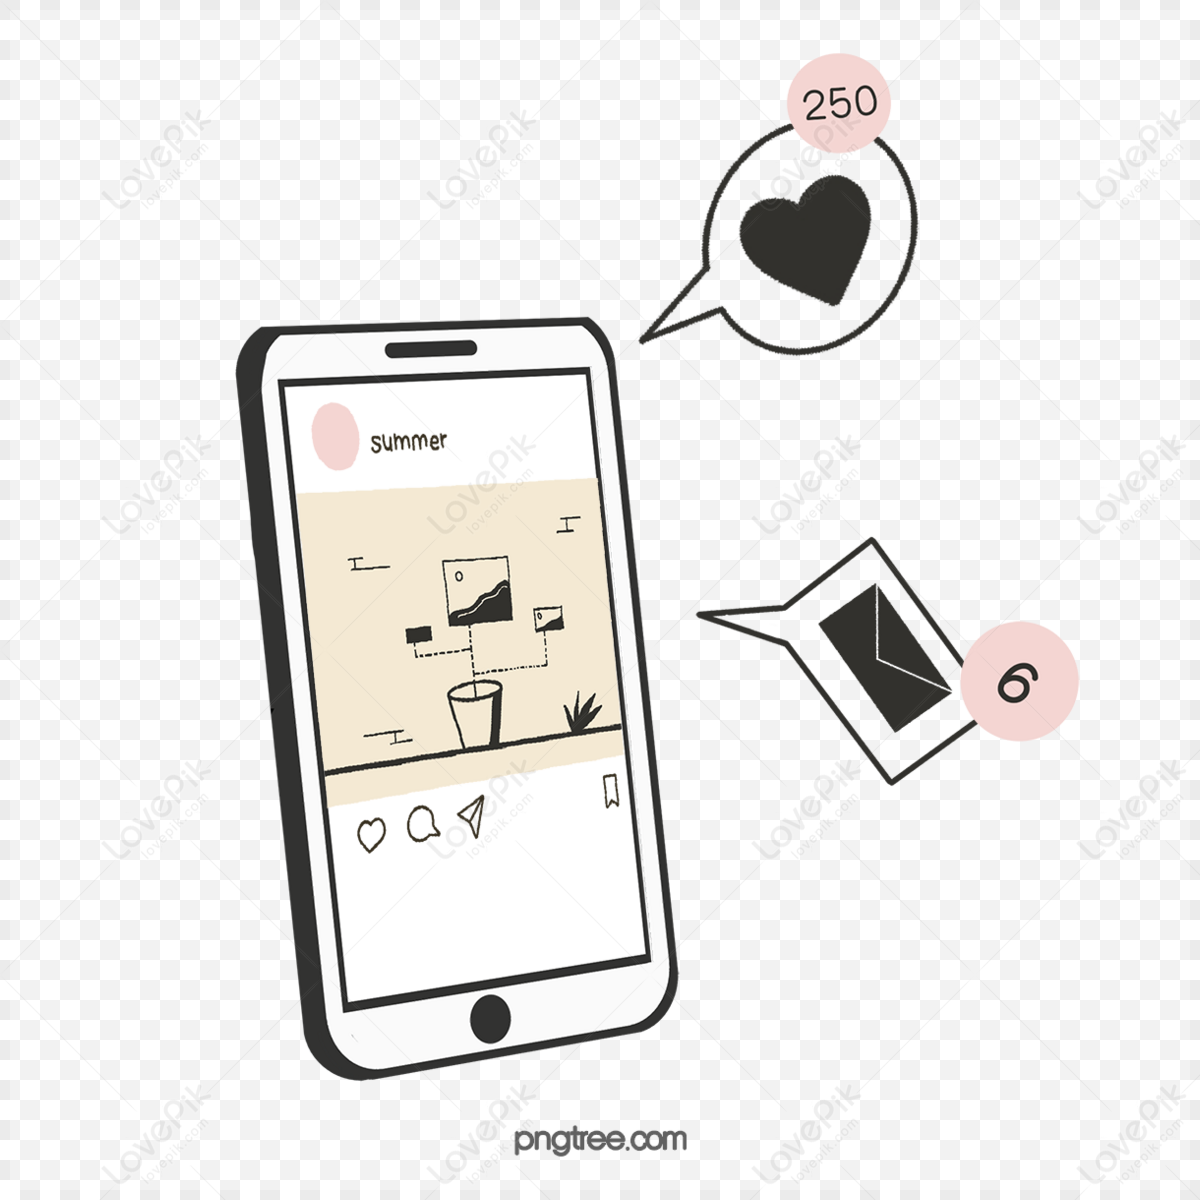 Mobile Apps And Smart Phone Drawing Stock Illustration - Download Image Now  - Portable Information Device, Mobile Phone, Icon Symbol - iStock